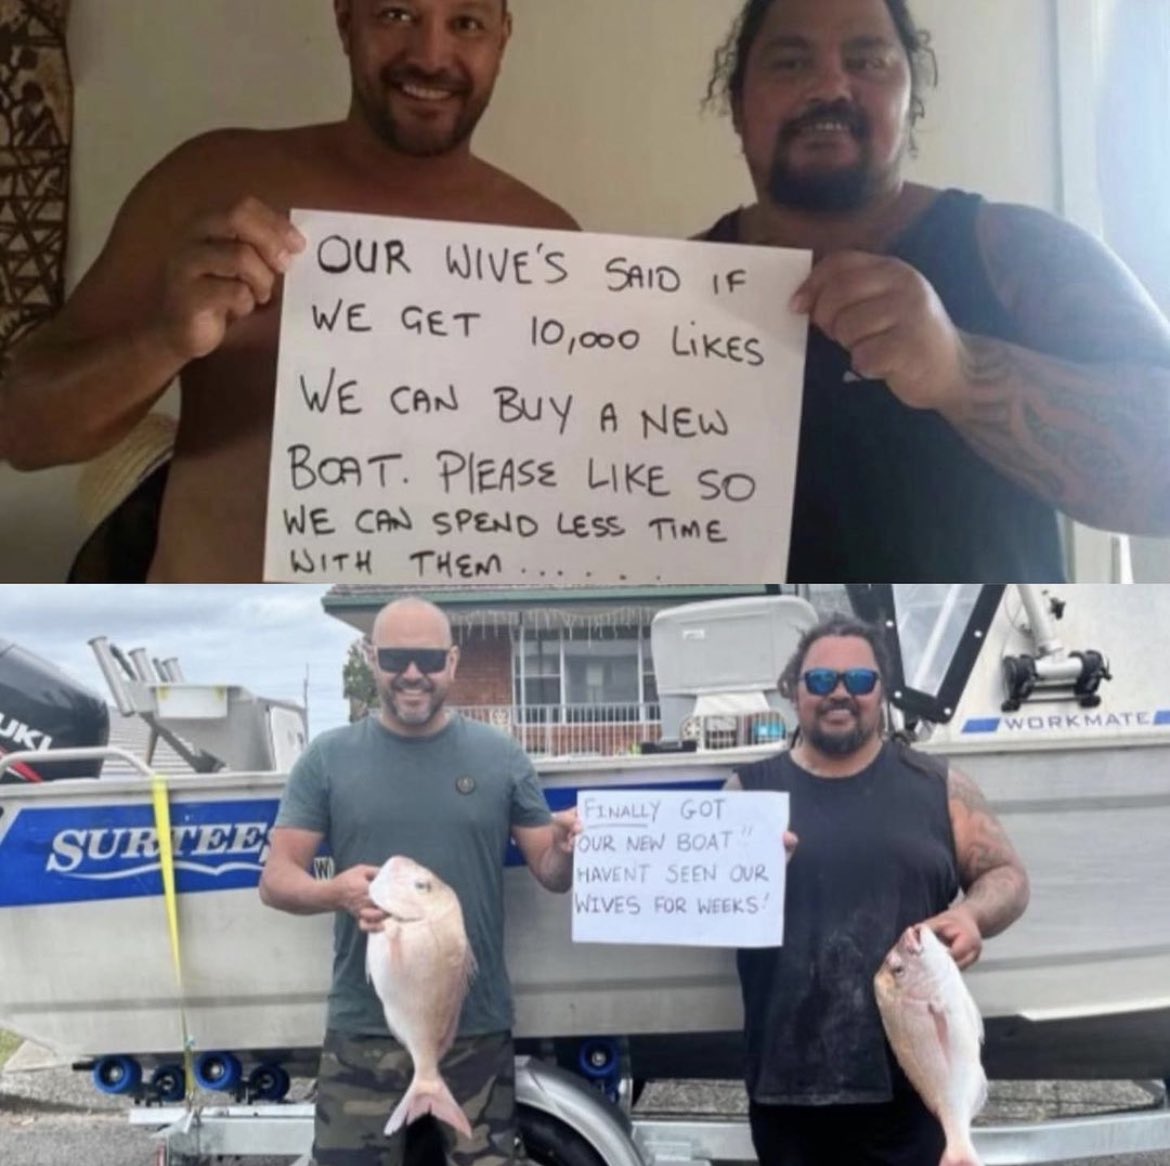 Bros helping bros - muscle - Ukl Surtee Our Wive'S Said If We Get 10,000 We Can Buy A New Boat. Please So We Can Spend Less Time With Them Finally Got Our New Boat